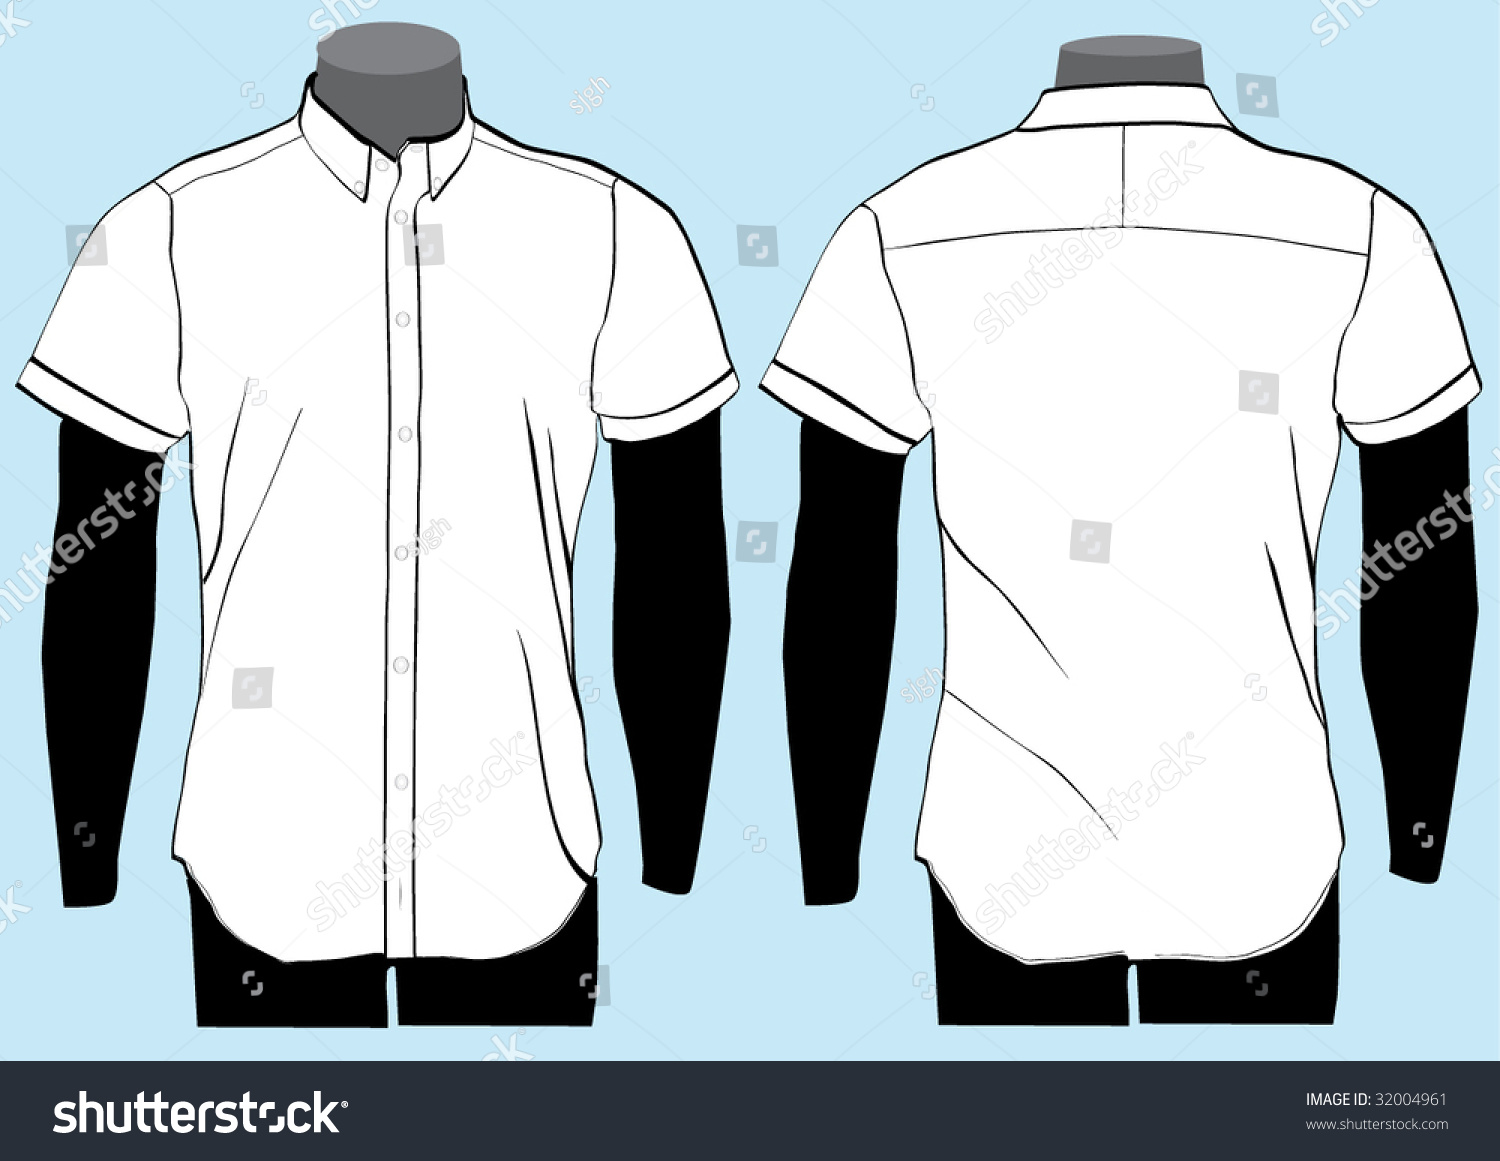 Shirt Template With Front And Back Stock Vector Illustration 32004961 ...